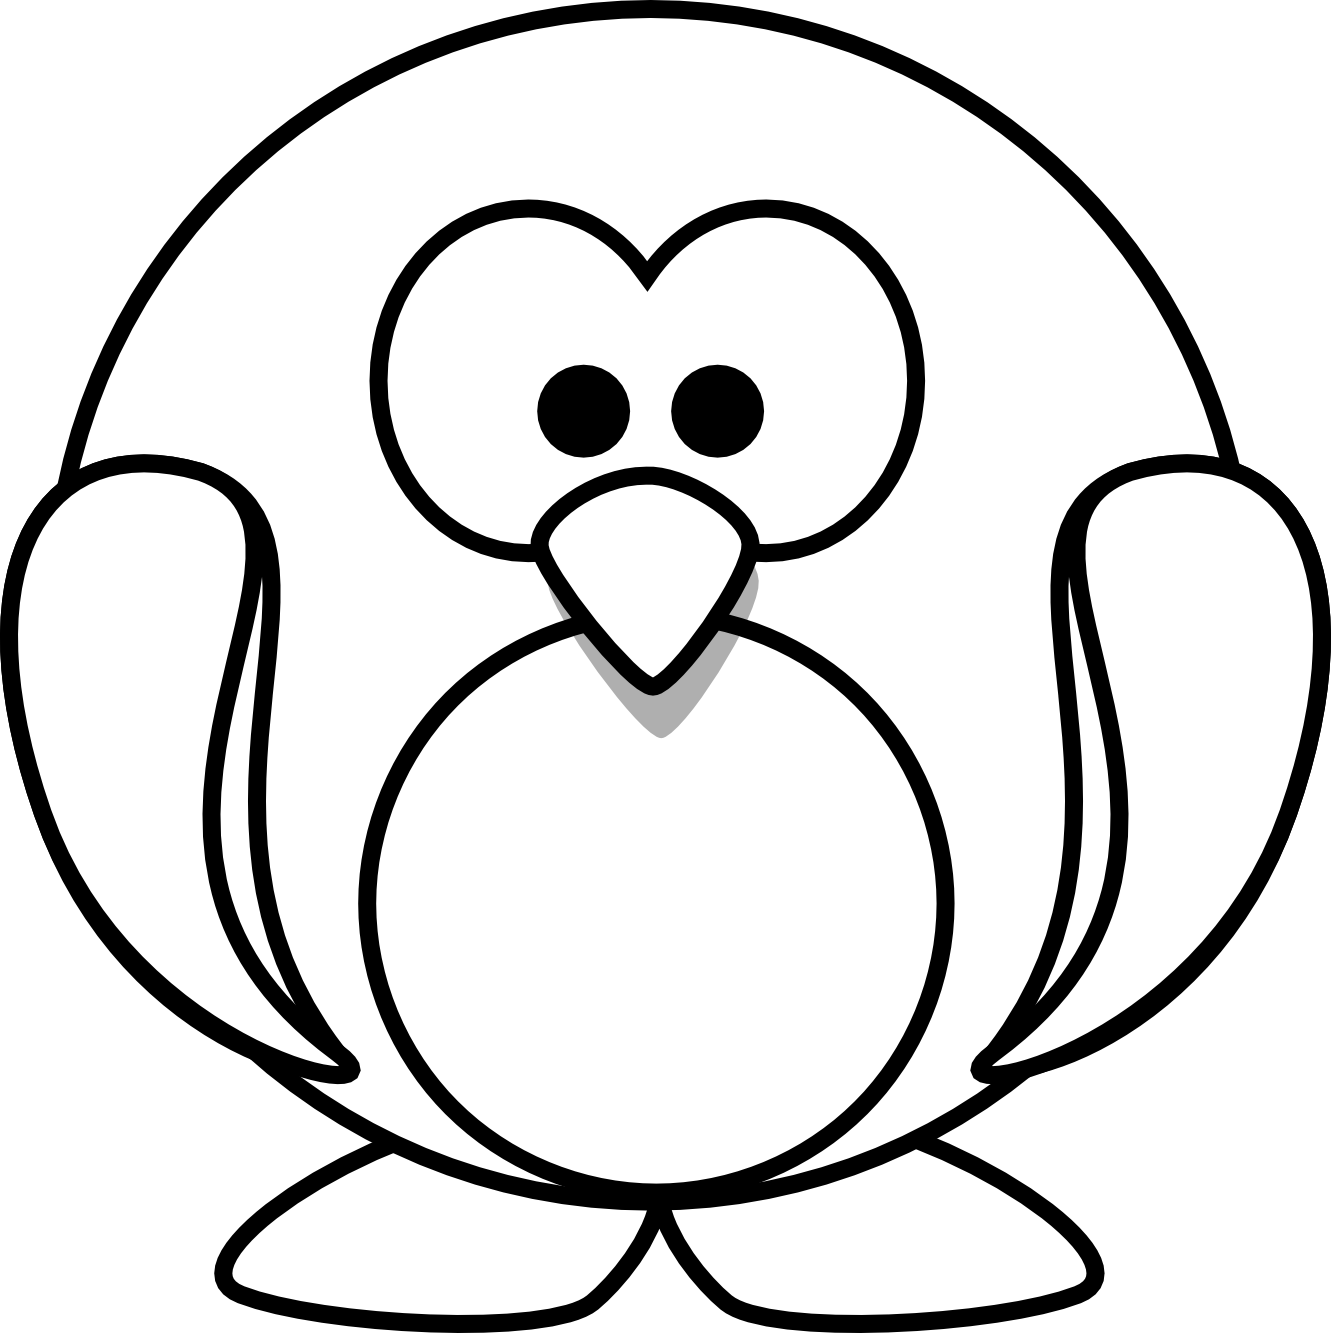 Cartoon penguins coloring pages - Coloring Pages & Pictures ...